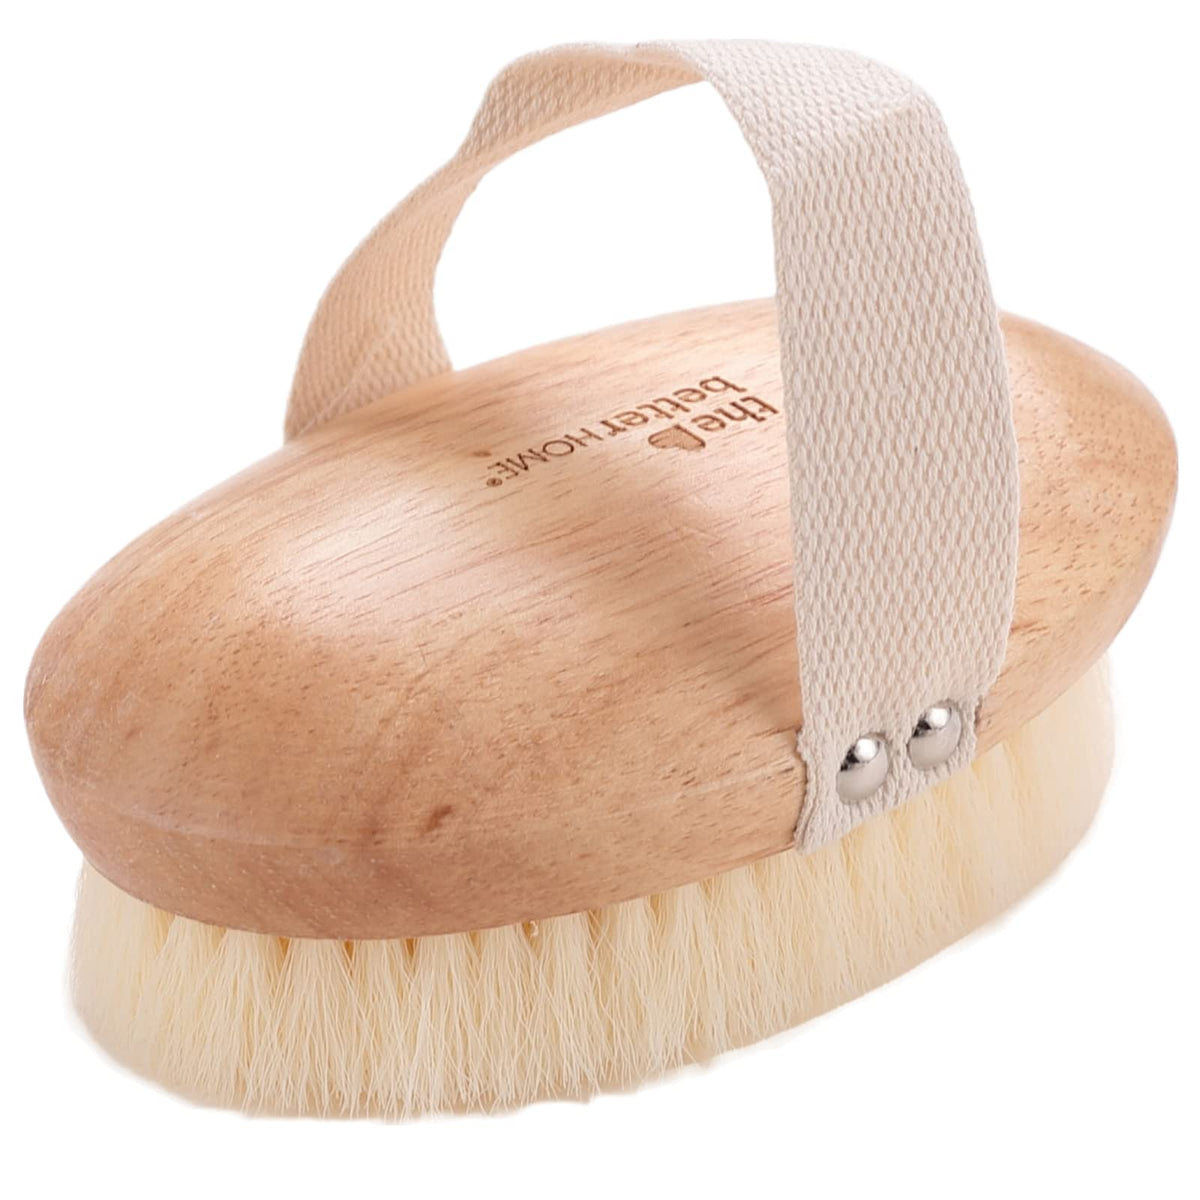 The Better Home Bathing Brush for Women and Men | Exfoliating Body Scrubber for Bathing | Bath Brush for Easy Use | Wooden Handle Body Brush for Bathing | Wooden Handle Loofah